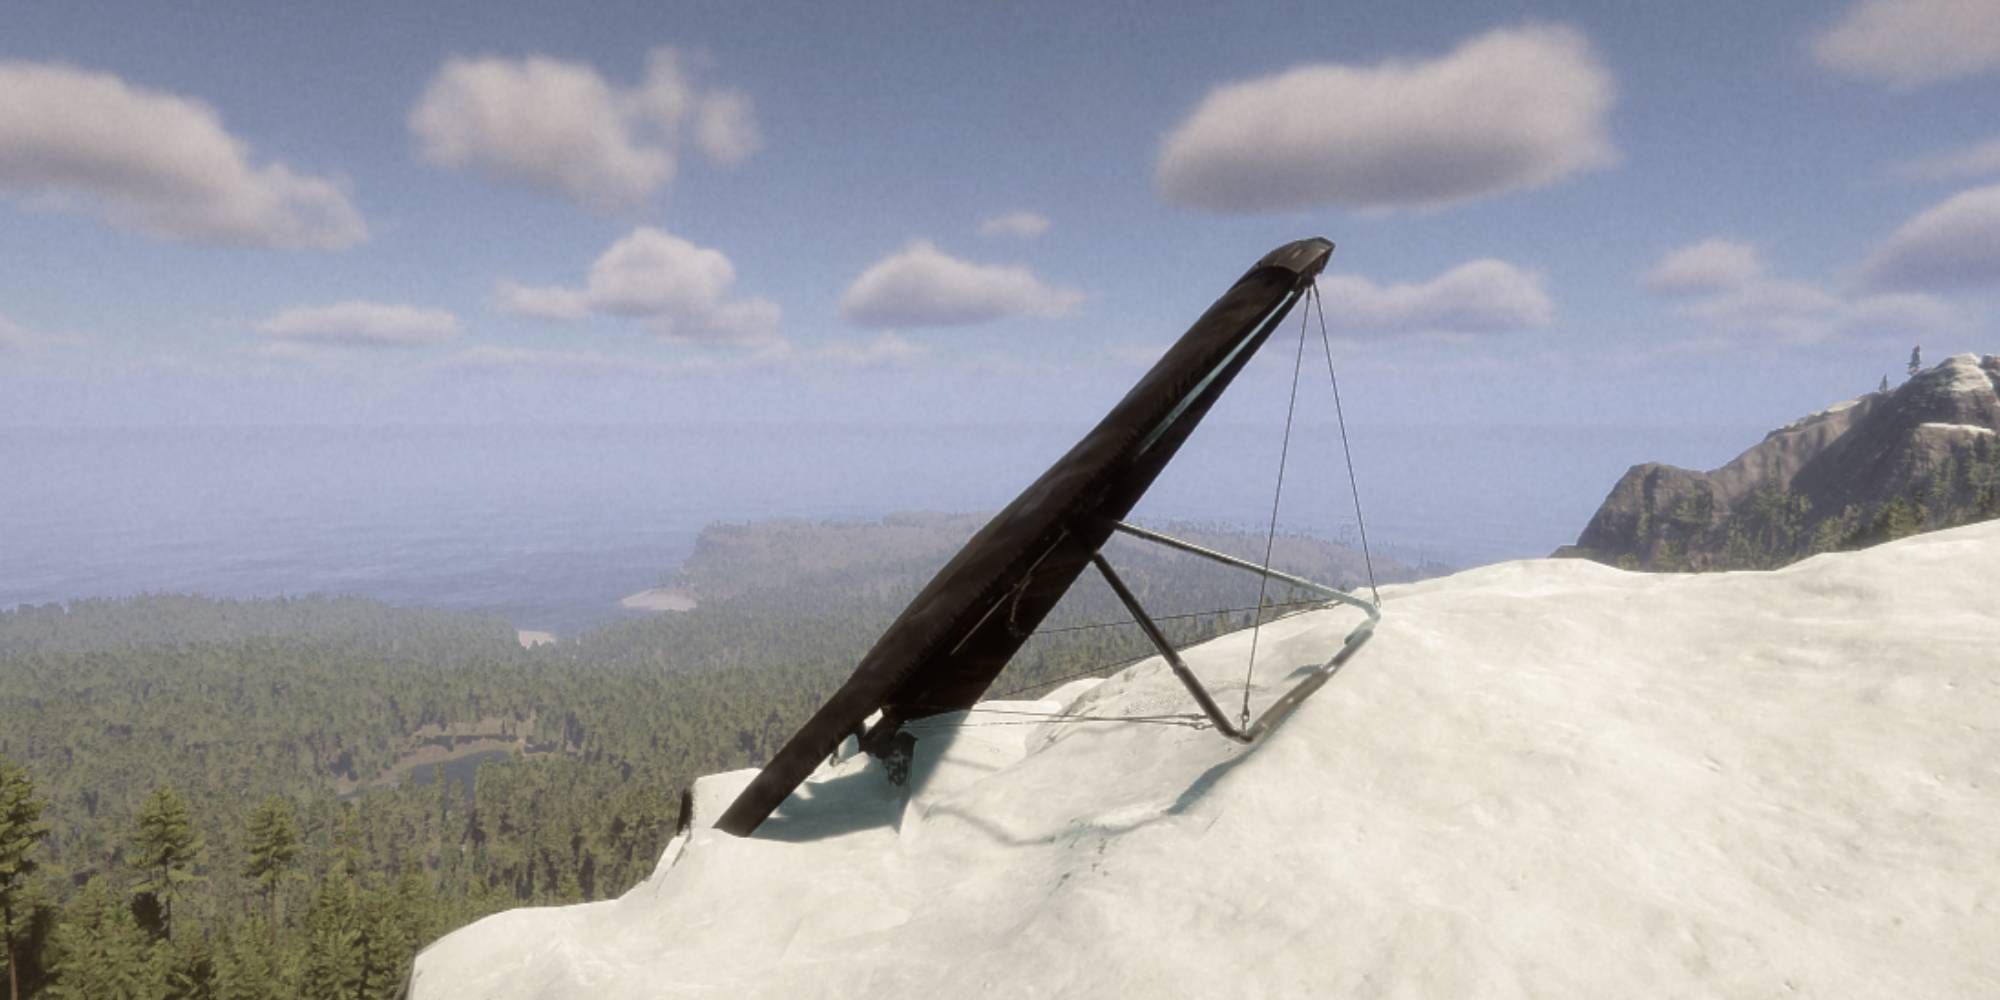 Hang Glider sitting on top of a snowy mountain by itself